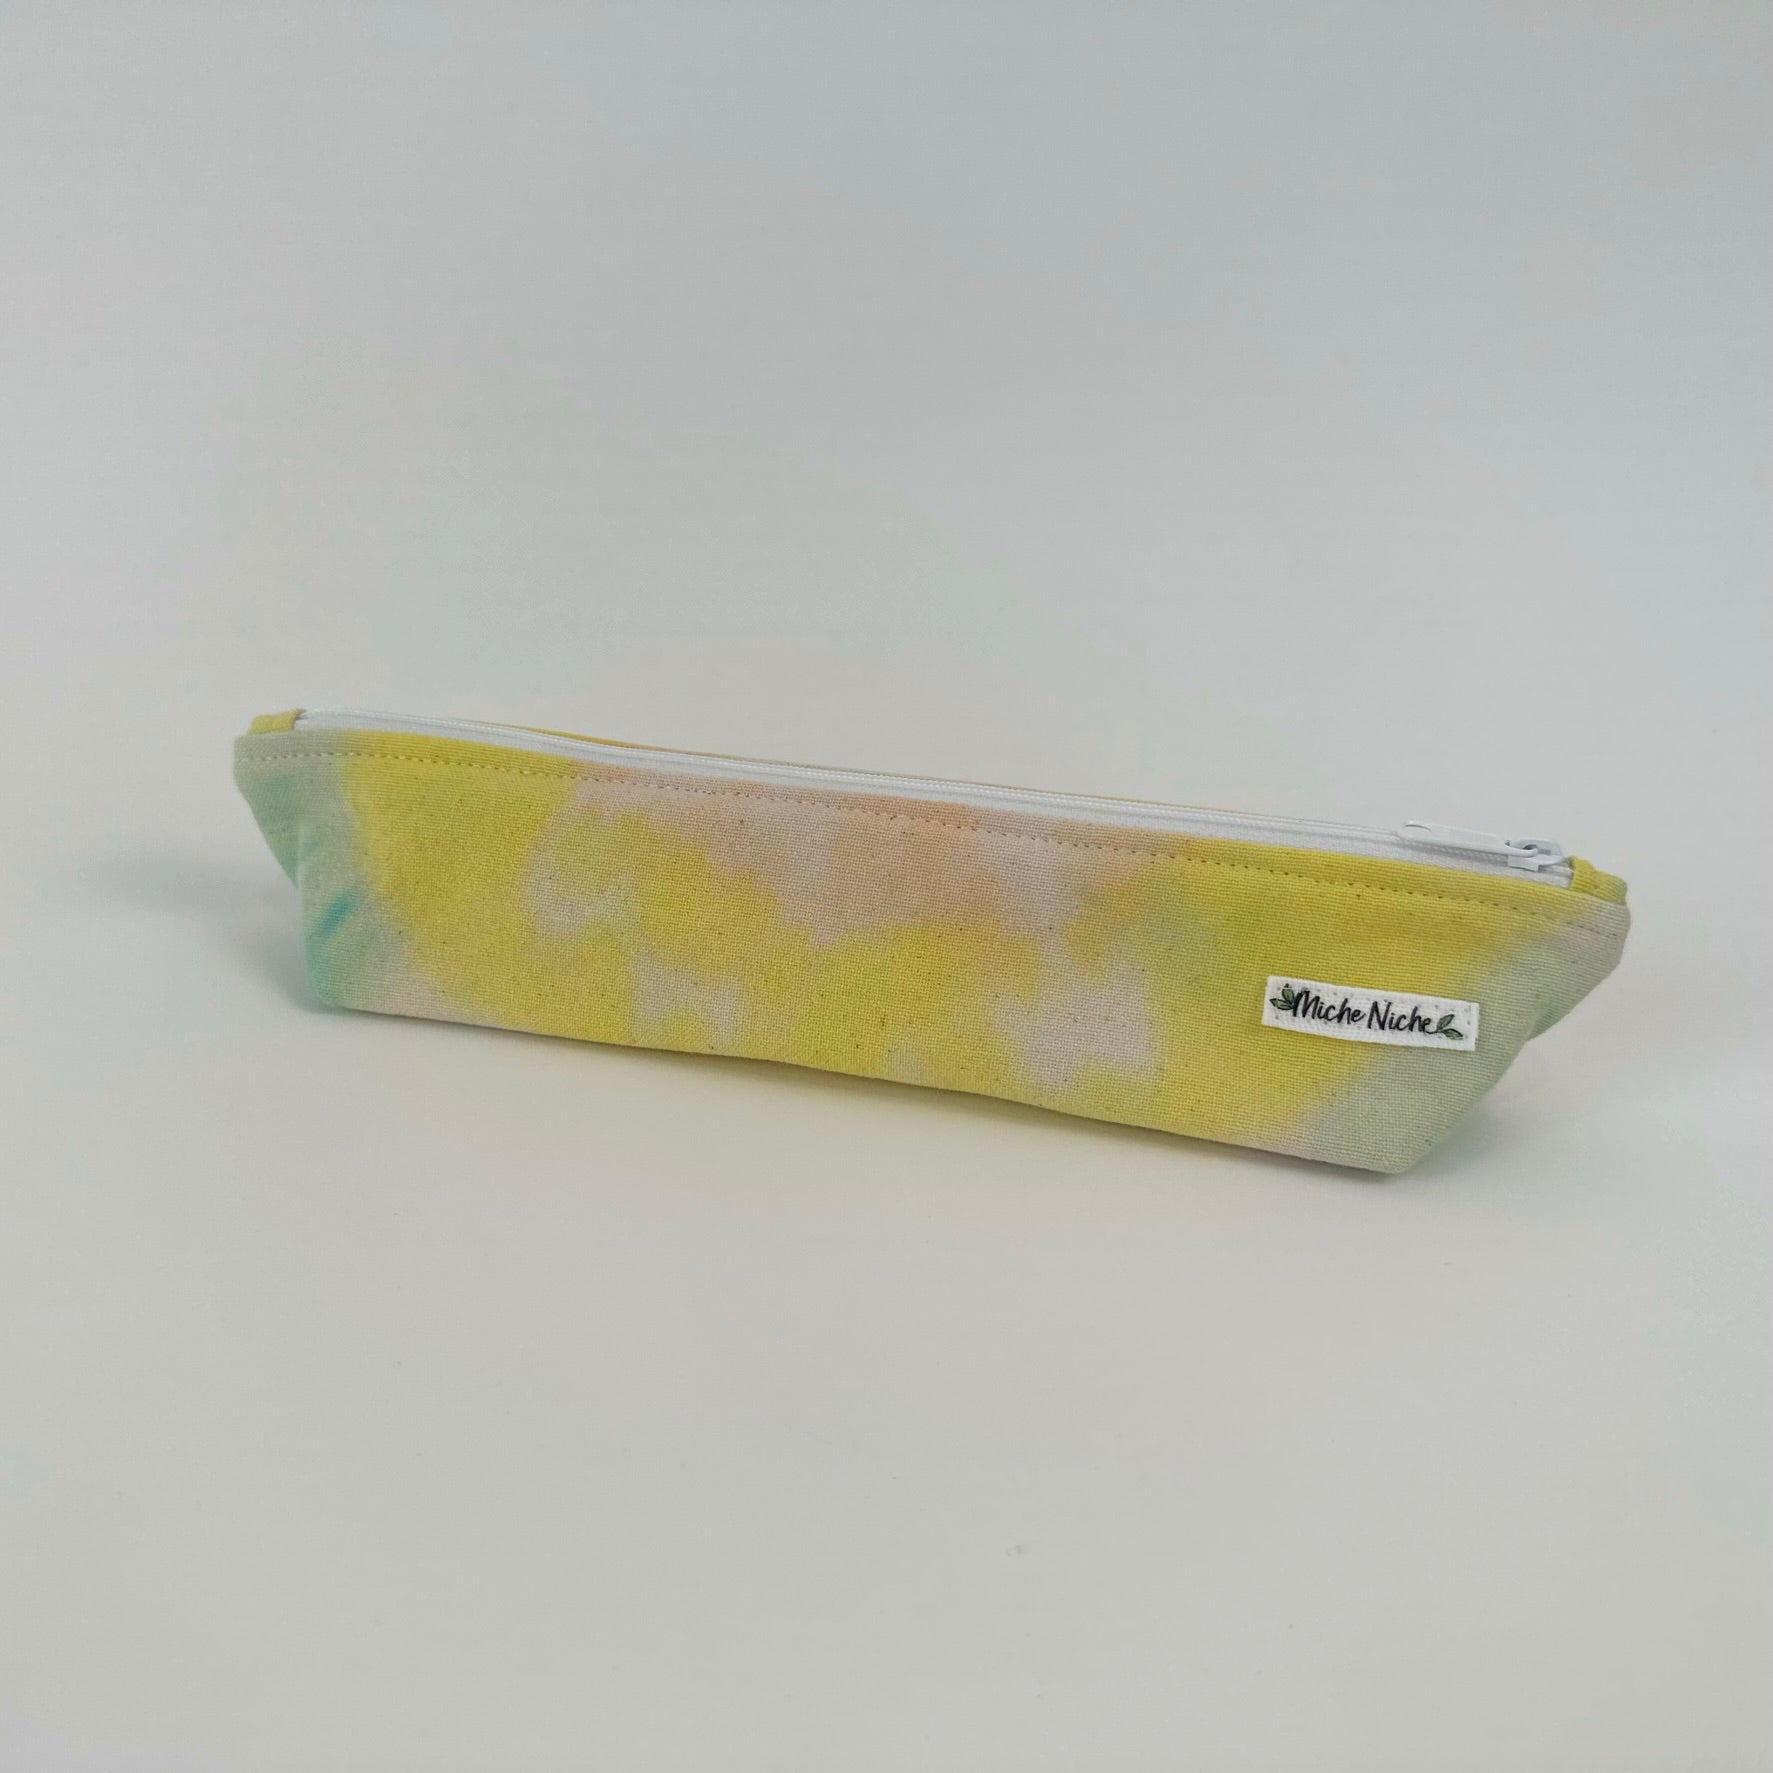 Miche Niche zipper pouch in a hand dyed pastel yellow, green, and pink tie dye pattern